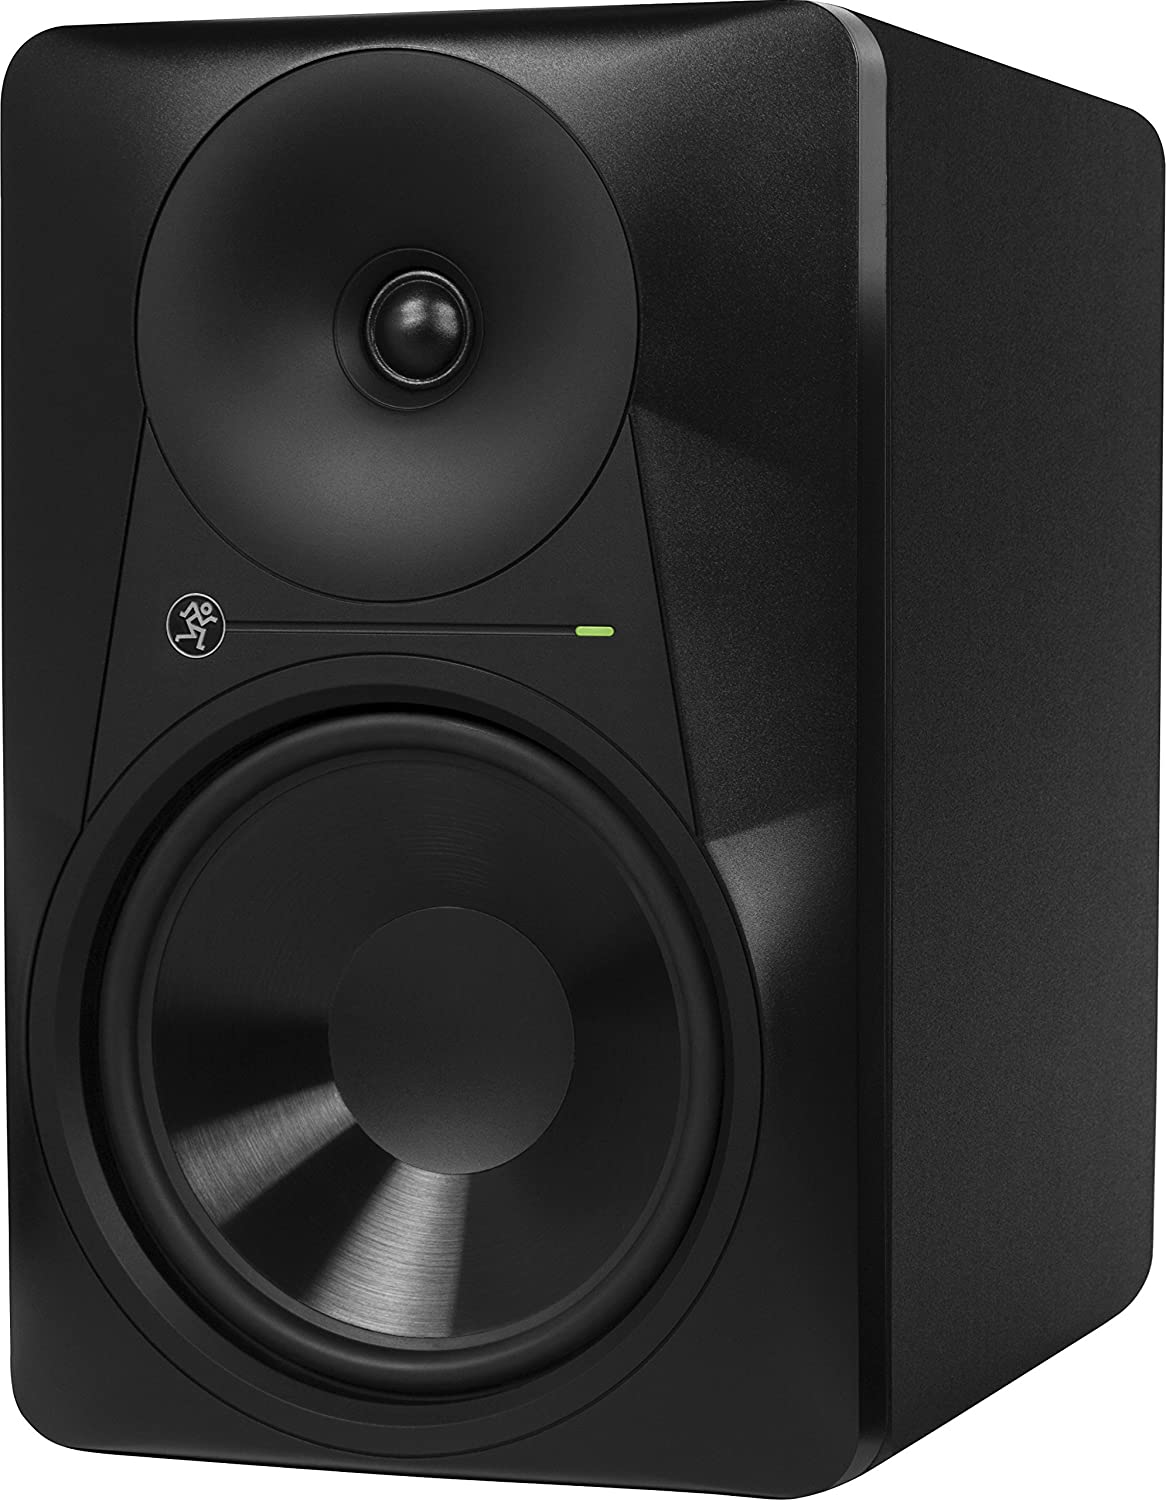 Mackie MR824 8 inch Active Channel Studio Monitor